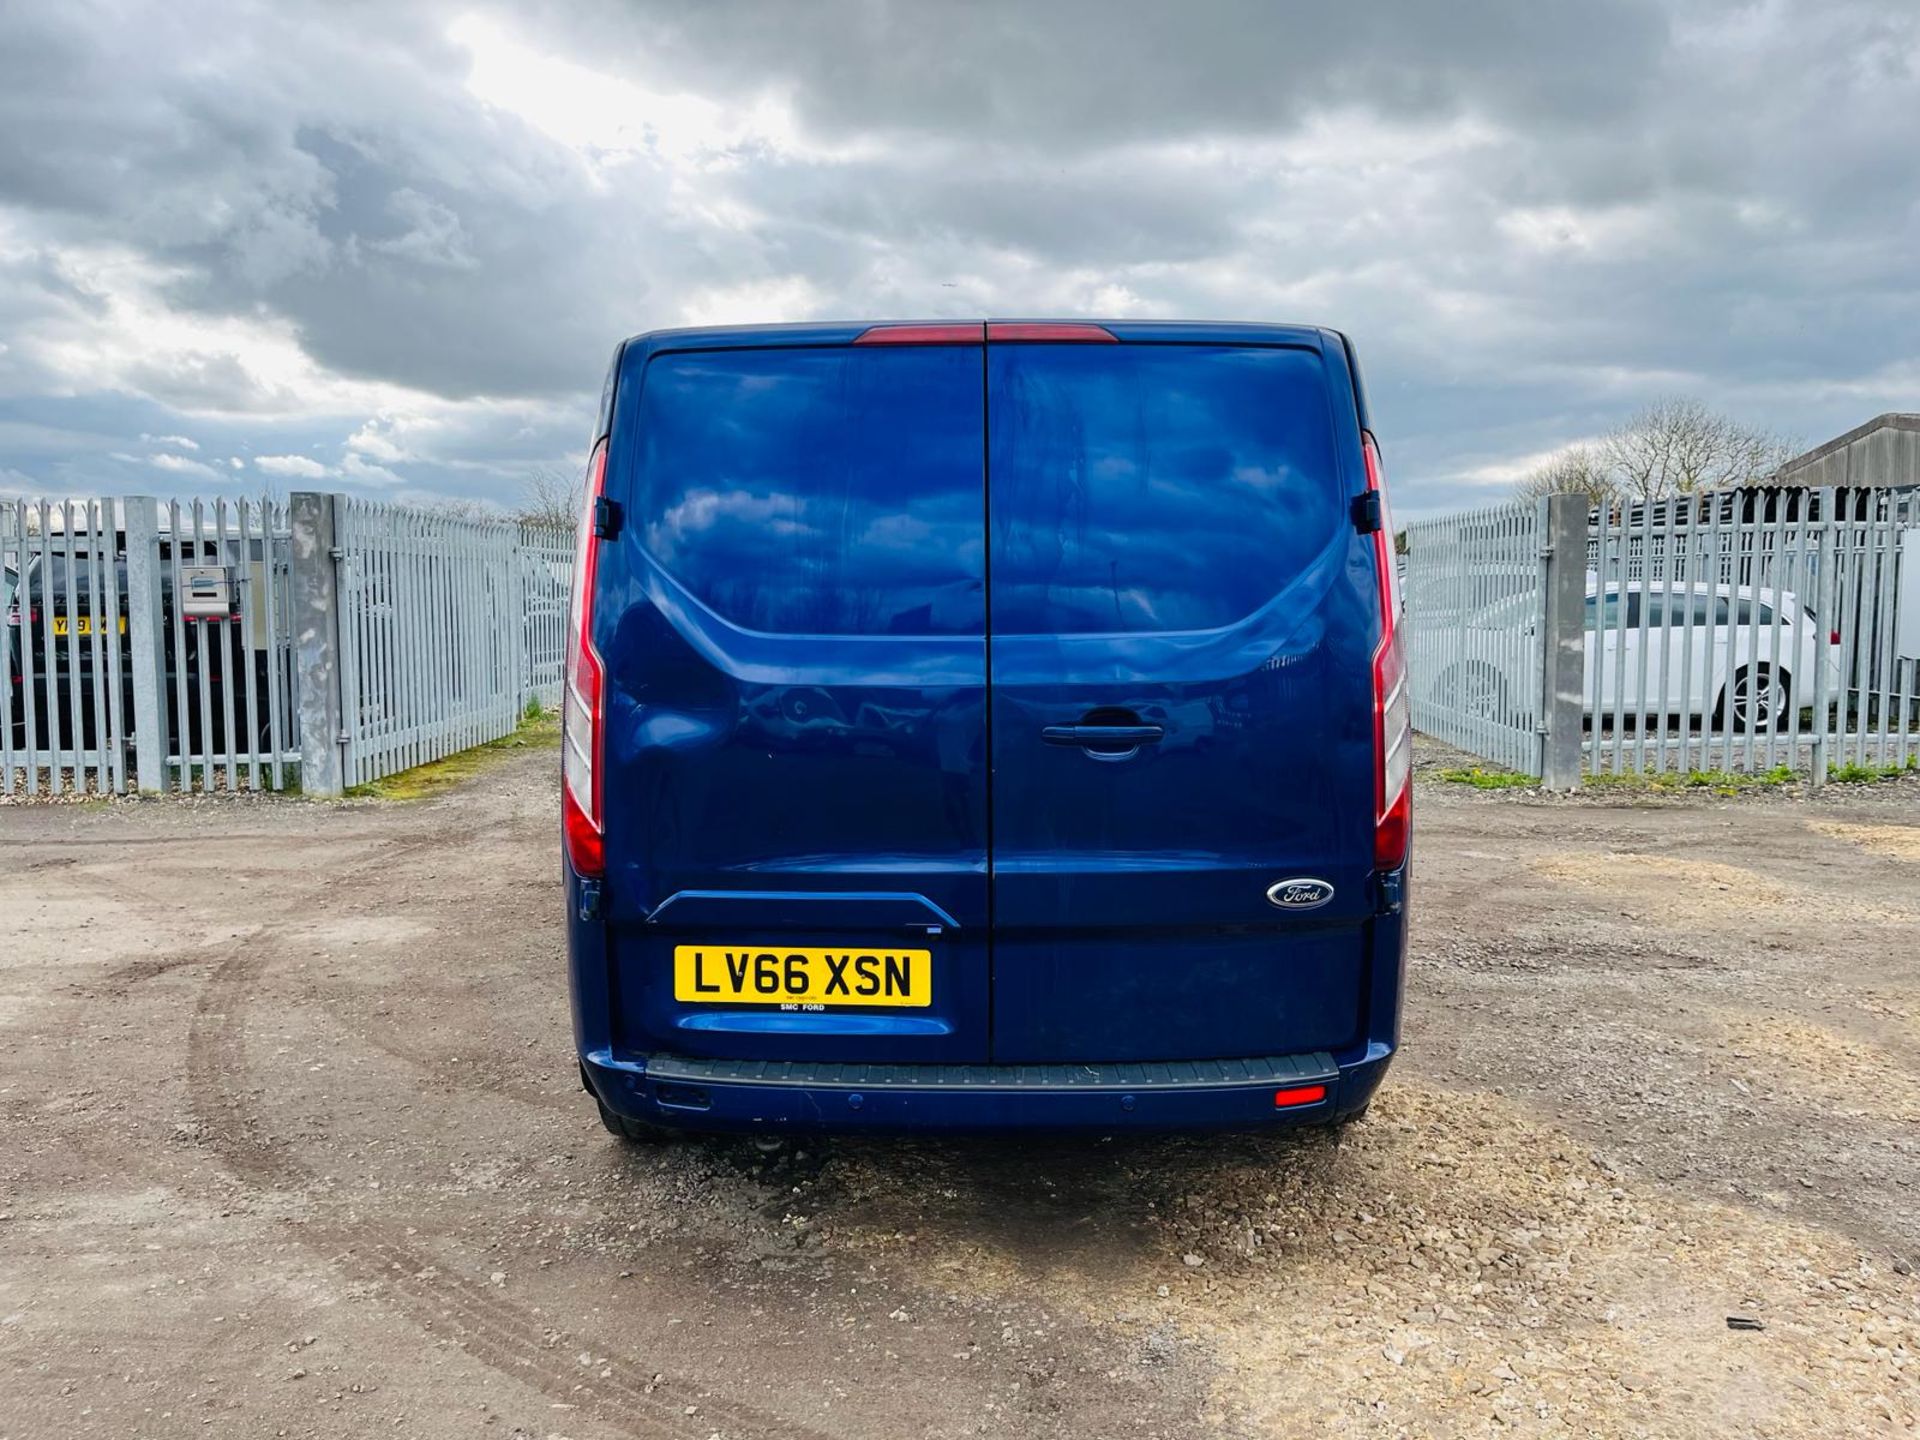 ** ON SALE ** Ford Transit Custom Limited 130 290 L3 H1 2.0 TDCI - ULEZ Compliant -Air Conditioning - Image 9 of 28